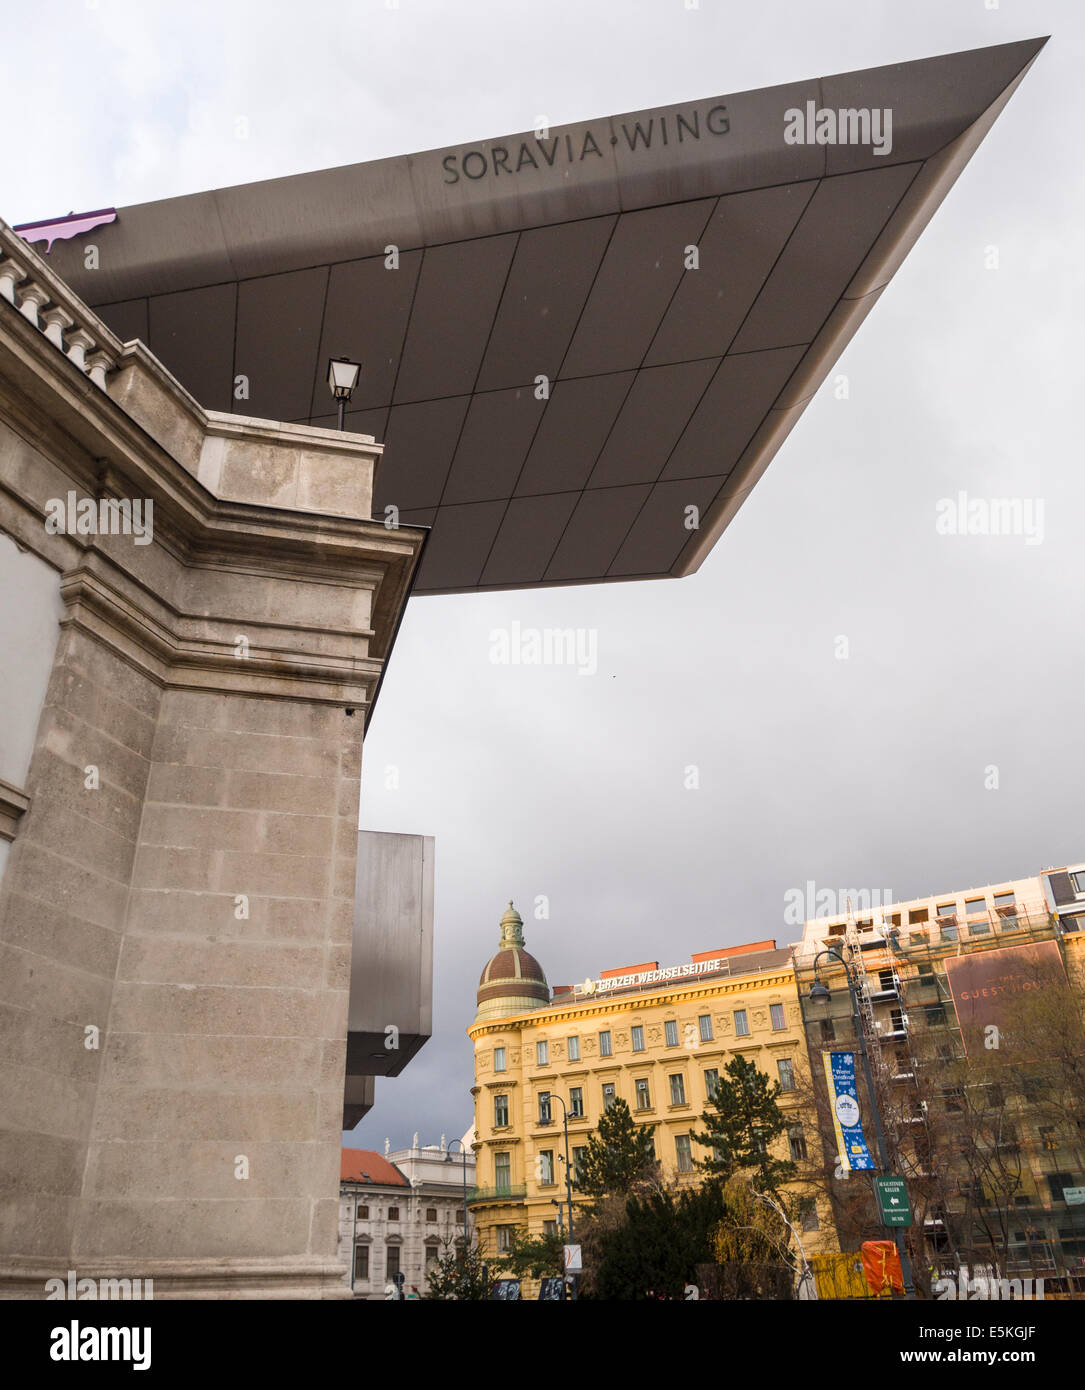 Sorvia Wing of the Albertina Museum . The modern wing flies over the colourful buildings in the square around Albertina Museum Stock Photo